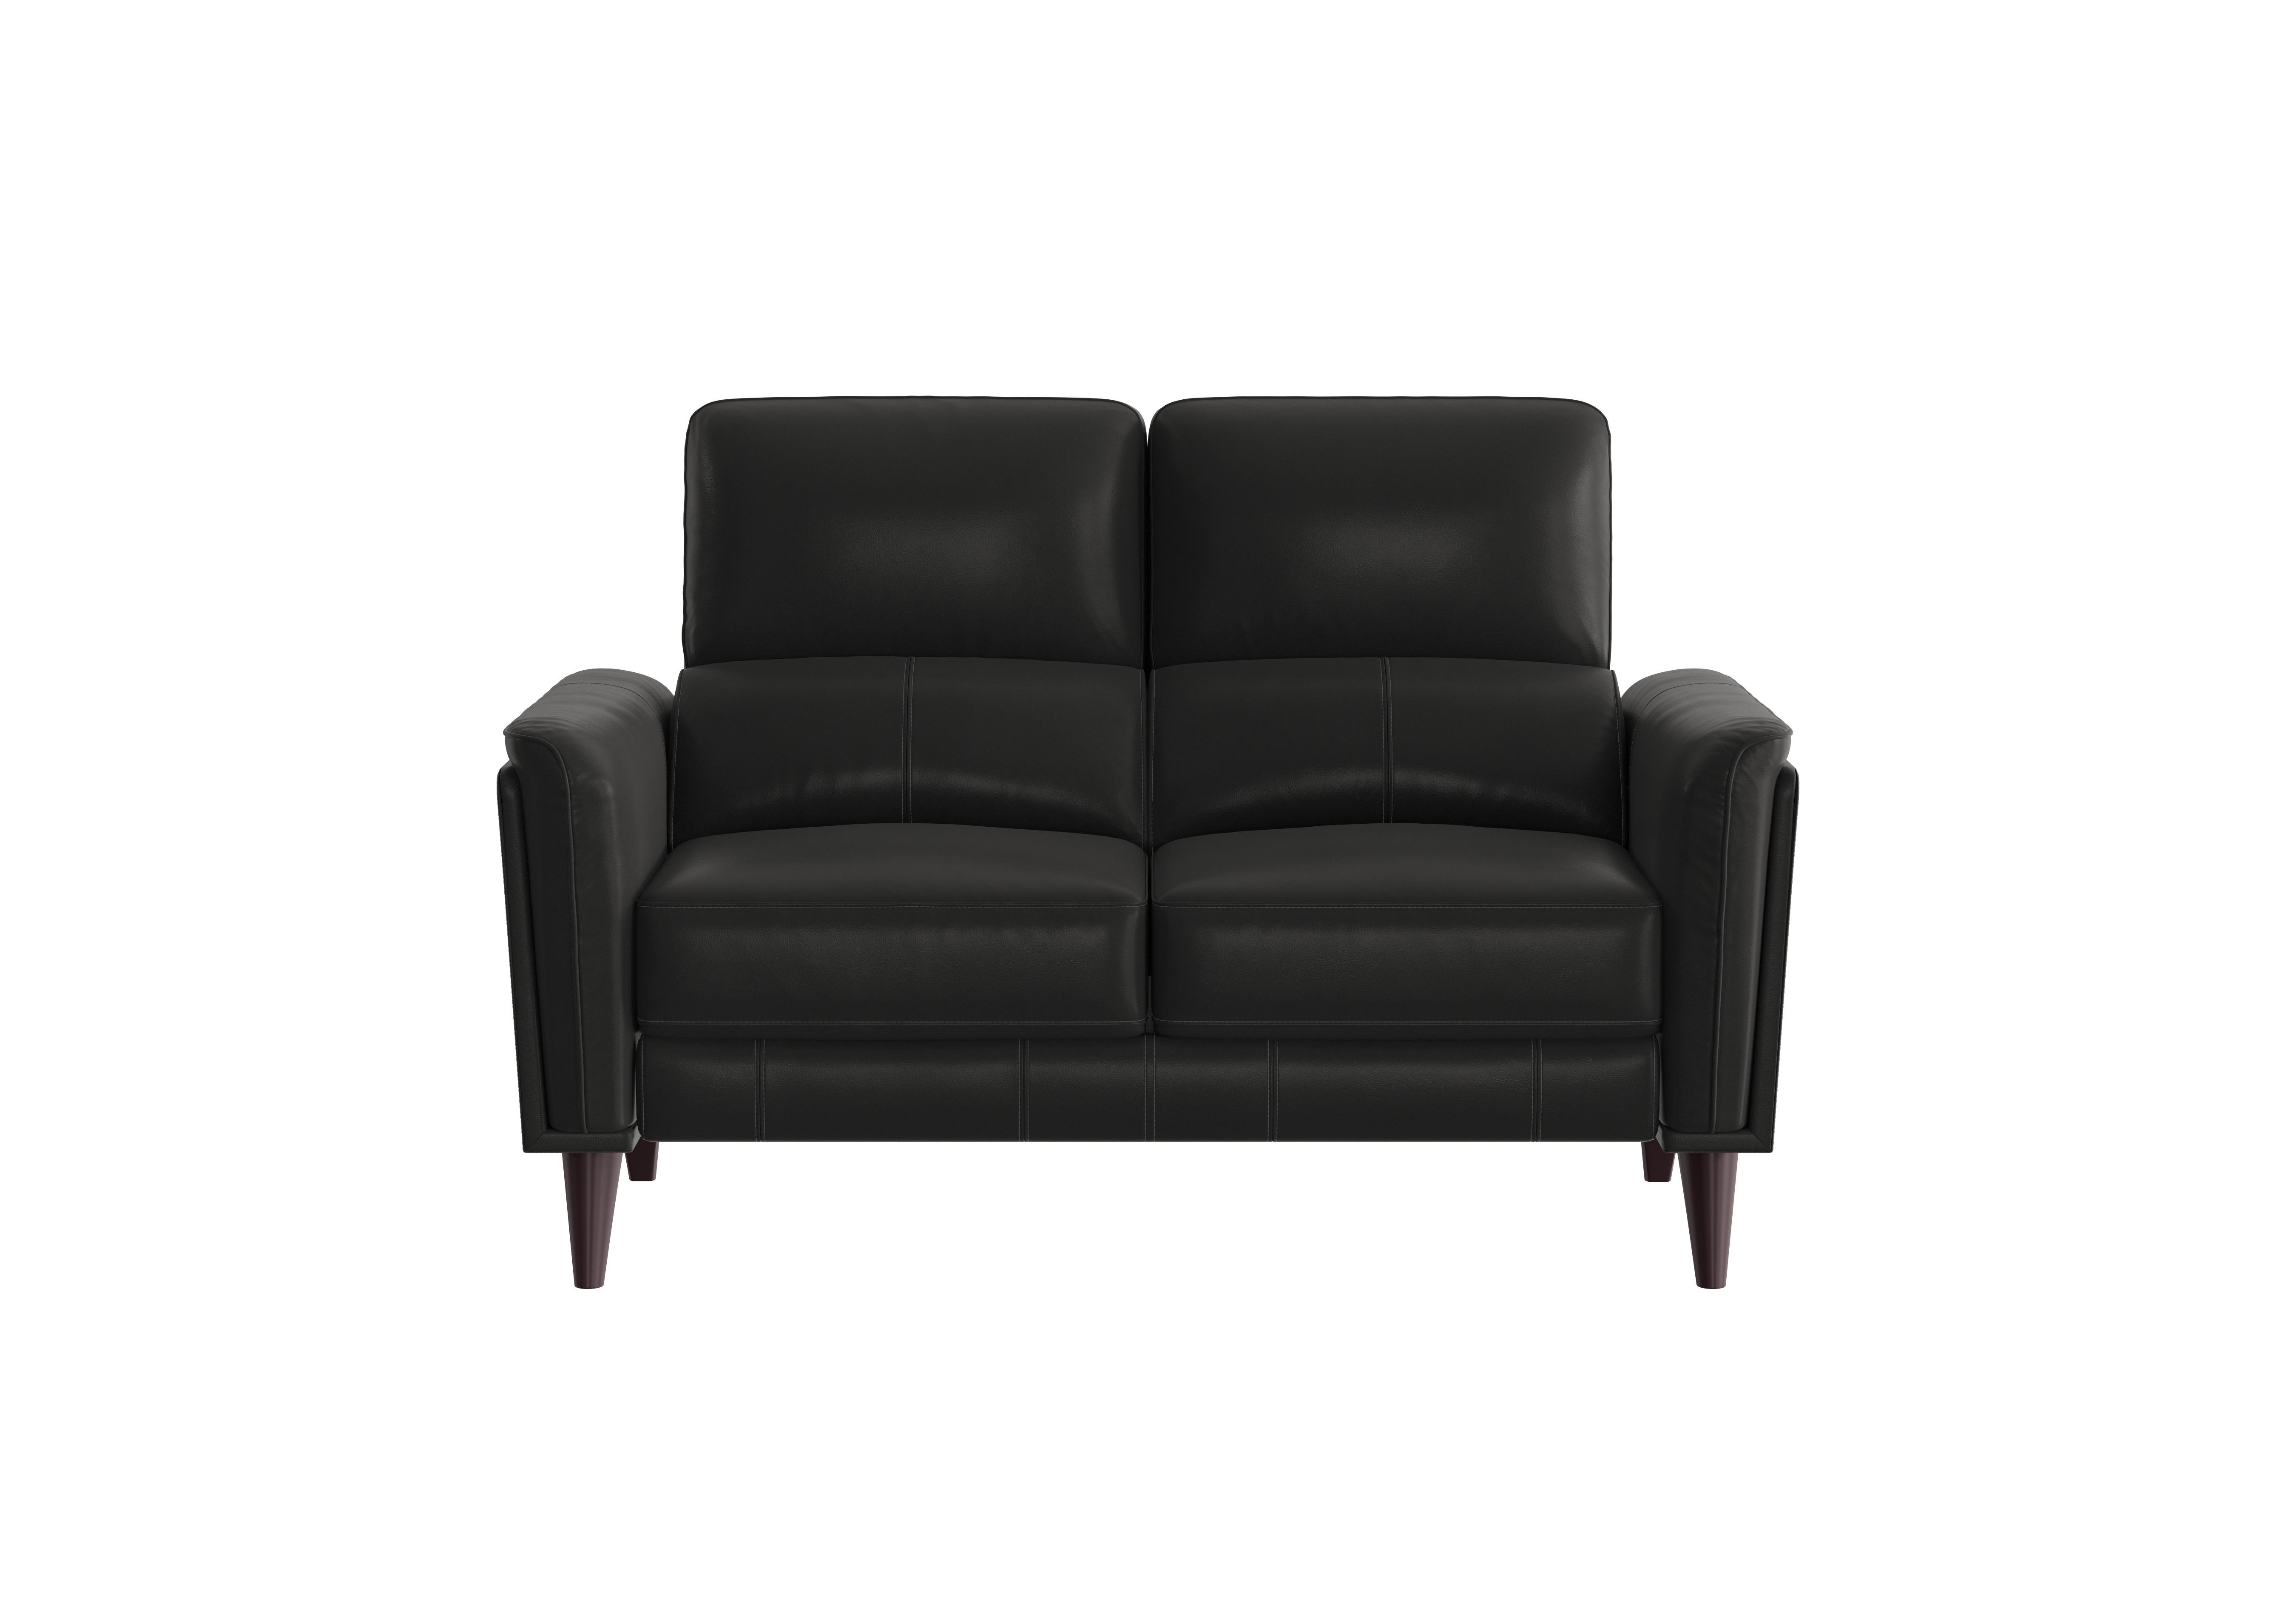 Compact Collection Klein 2 Seater Leather Sofa in Bv-3500 Classic Black on Furniture Village